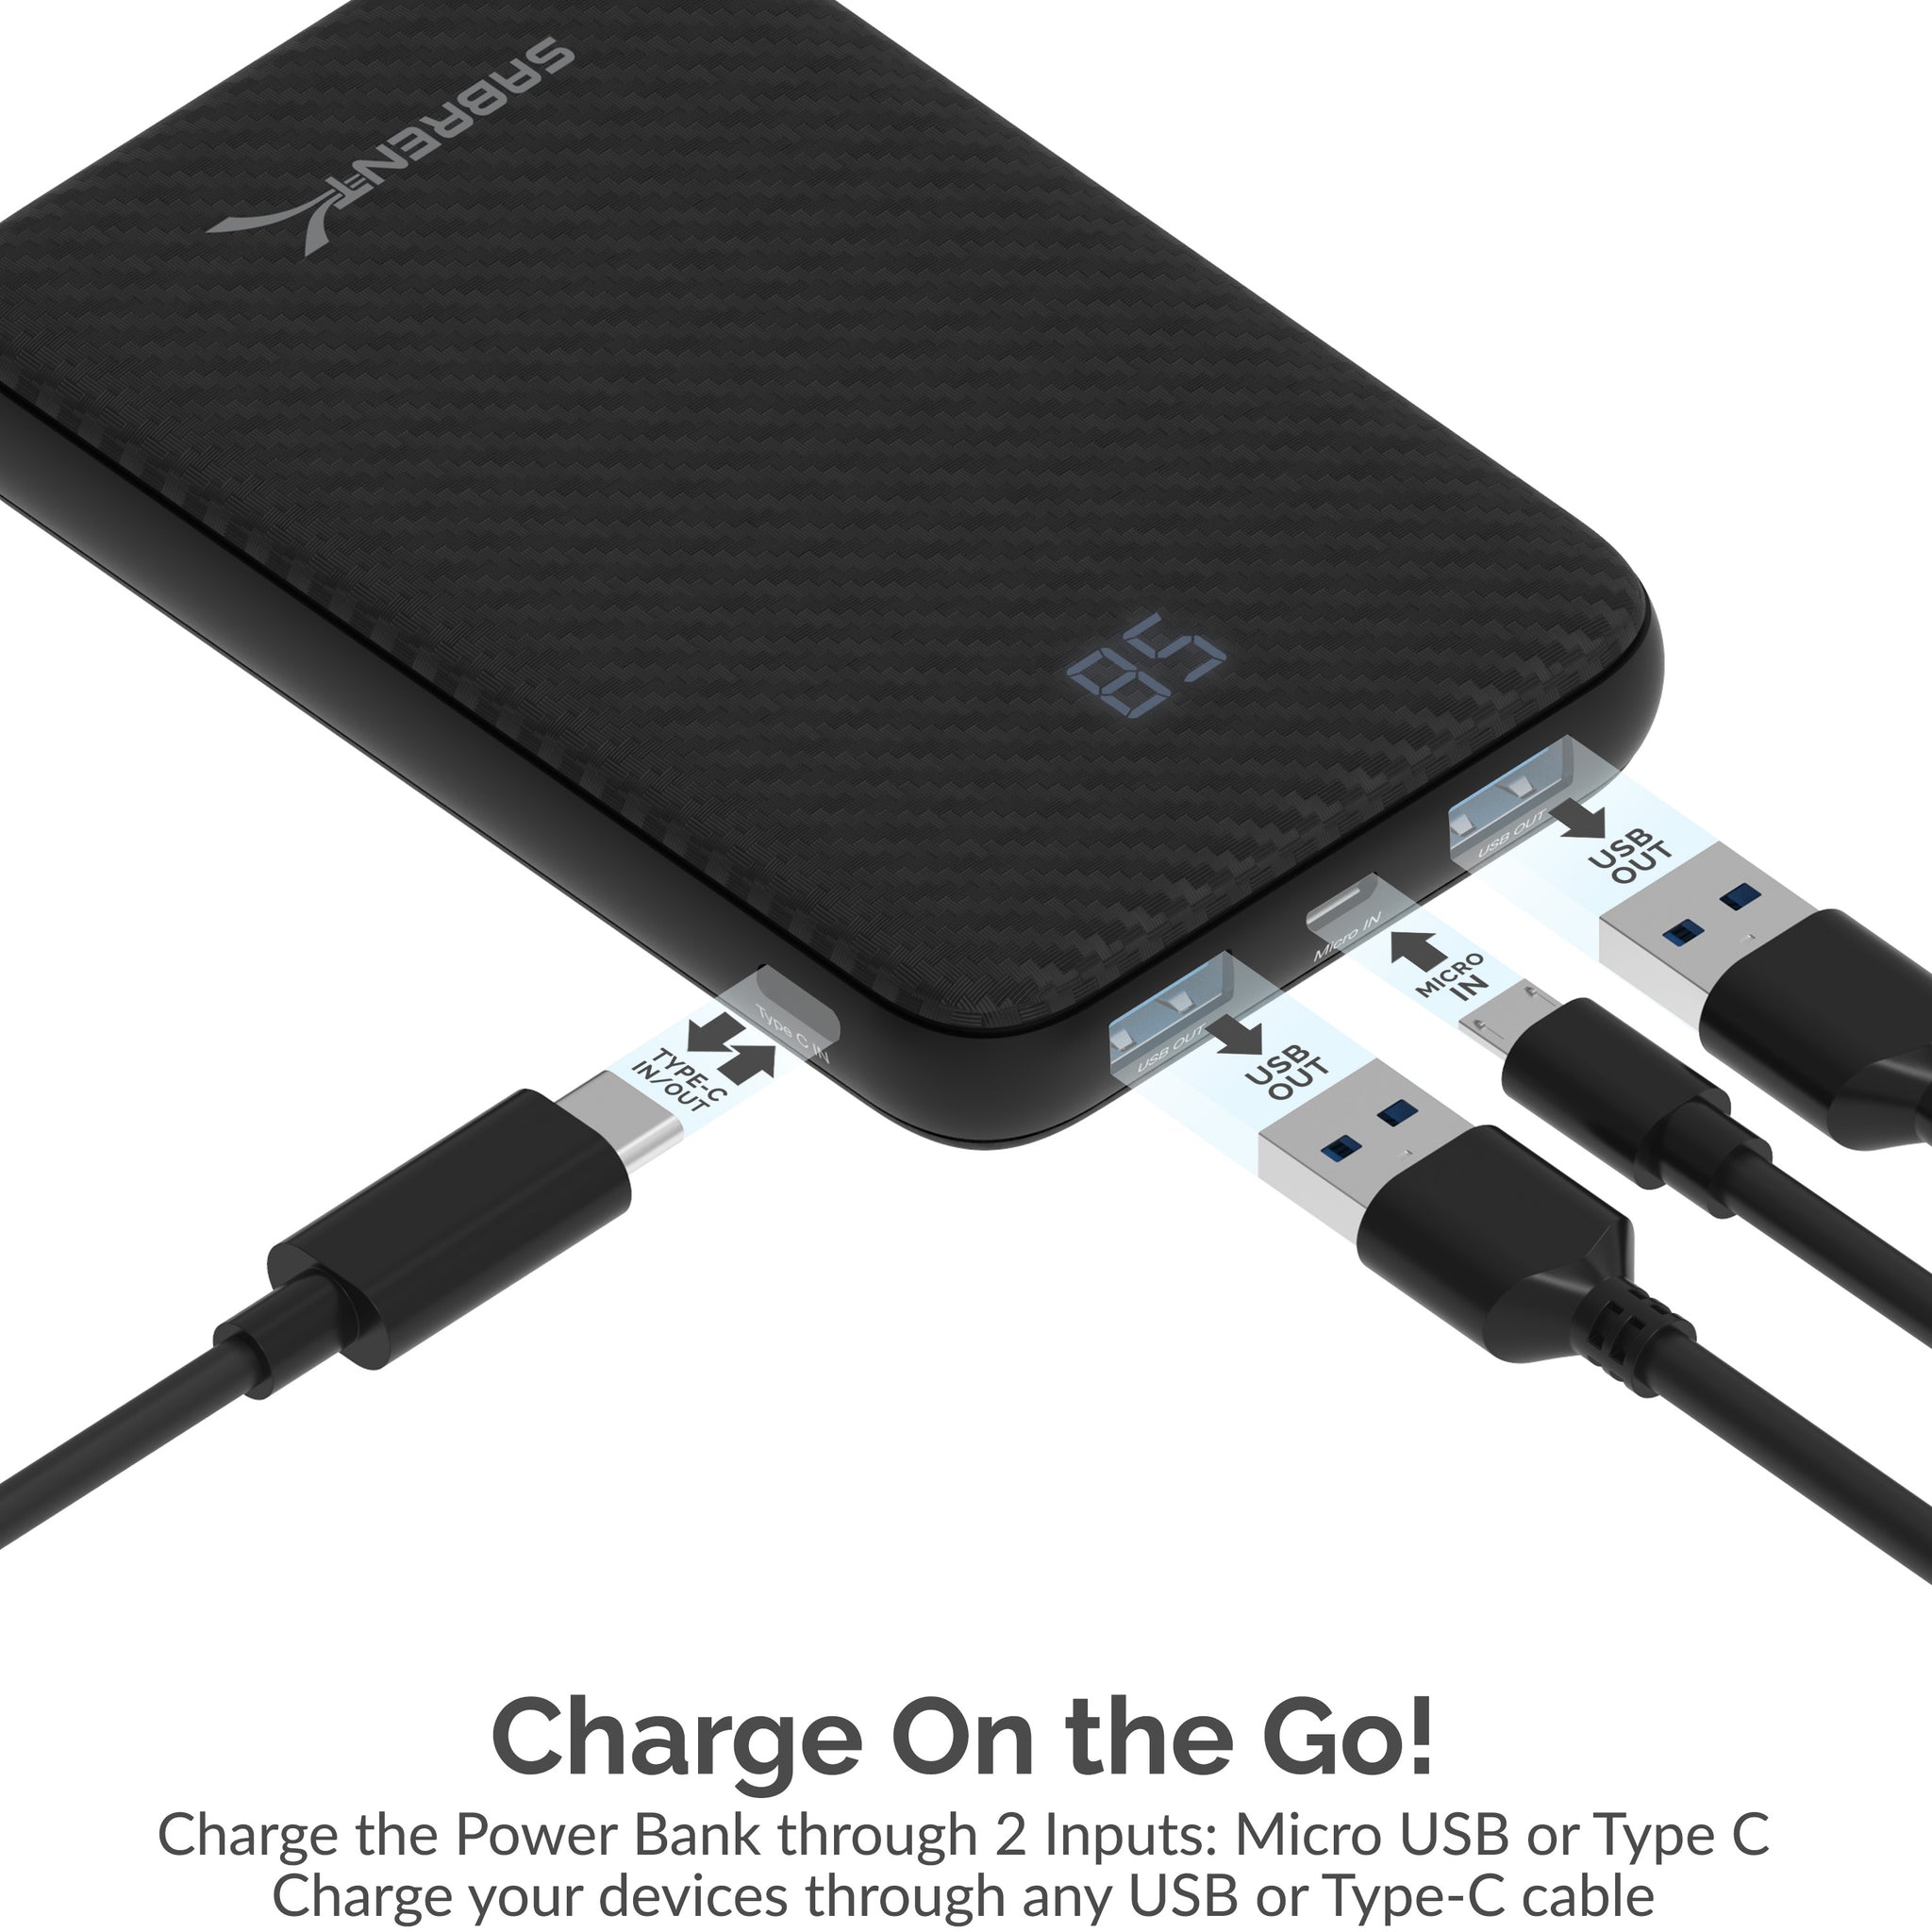 Sabrent PB-Y10B 10000 mAh USB C PD Power Bank with Quick Charge 3.0 ()